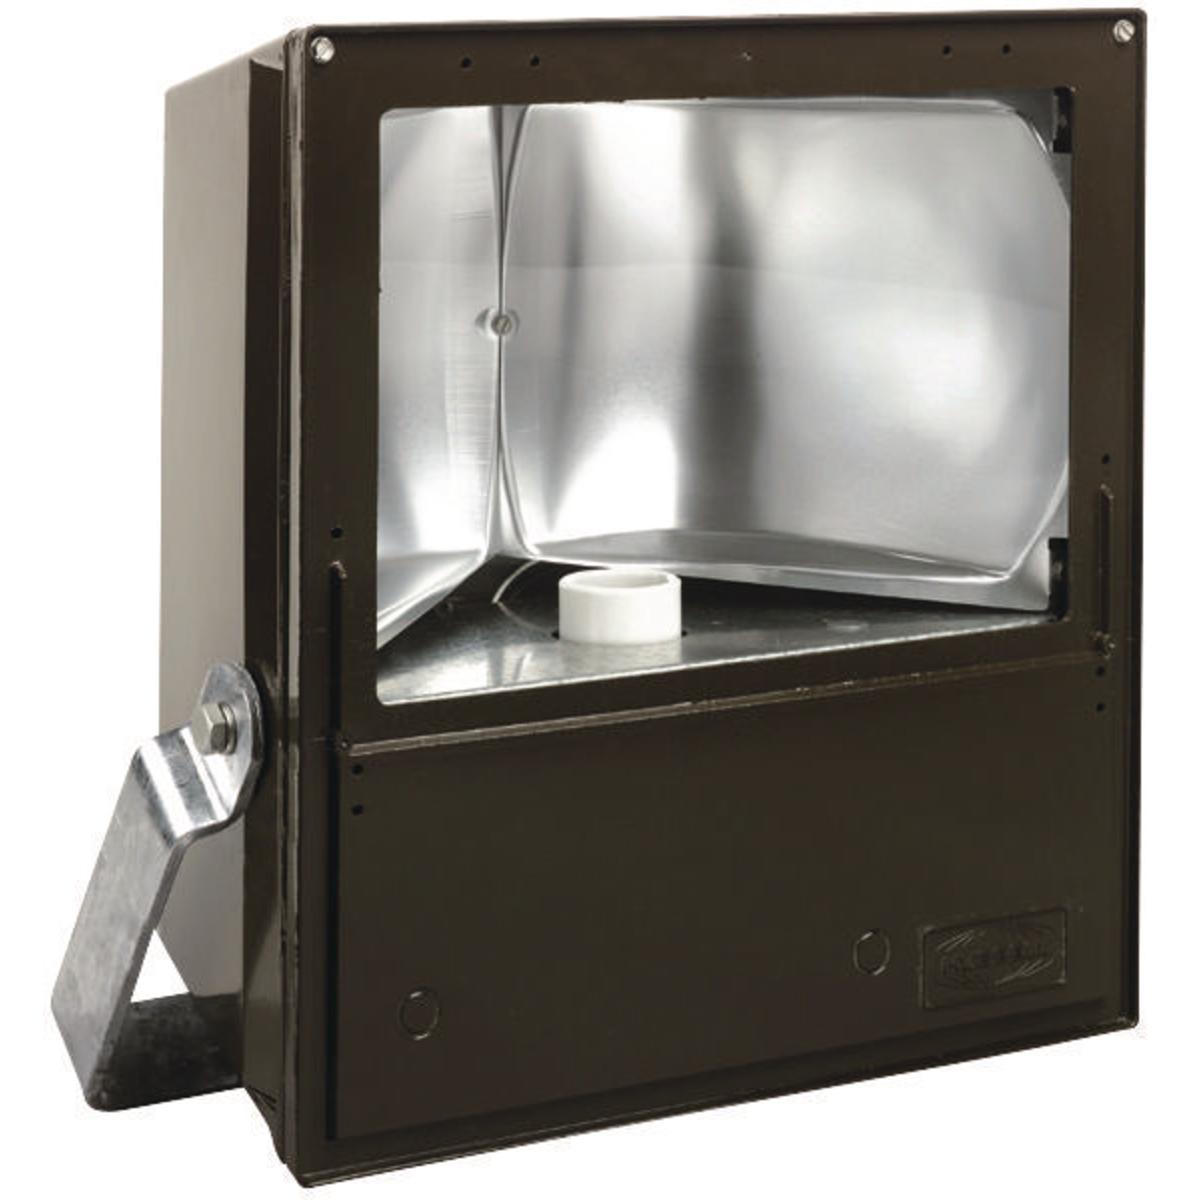 Hubbell KFP350-76 KF Series - Aluminum 350 Watt Pulse Start Metal Halide Floodlight (Lamp Not Included) - Quadri-Volt (120/208/240/277V) At 60Hz  ; Rugged weathertight housing of copperfree aluminum with corrosion resistant bronze finish ; Wide beam distribution ; Thermal 